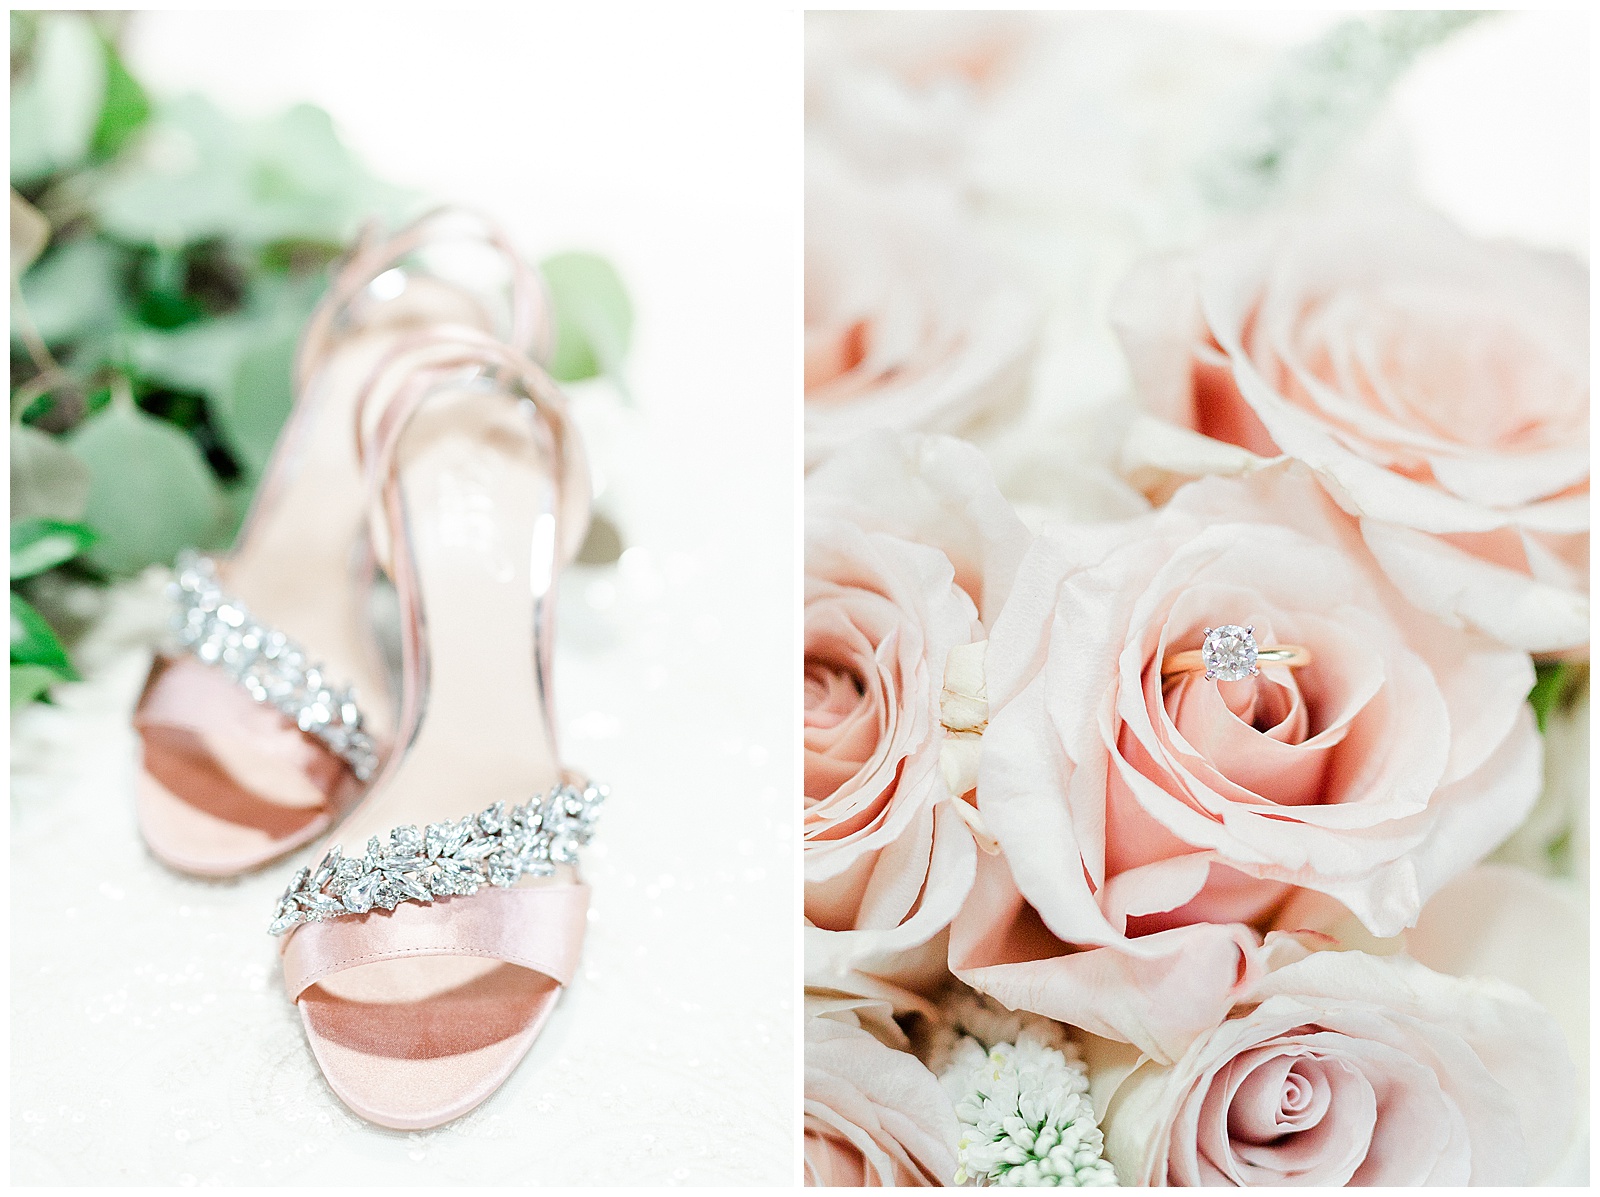 Pink Rhinestone High Heeled Sandals and Roses from Summer Wedding in Charlotte, NC | check out the full wedding at KevynDixonPhoto.com